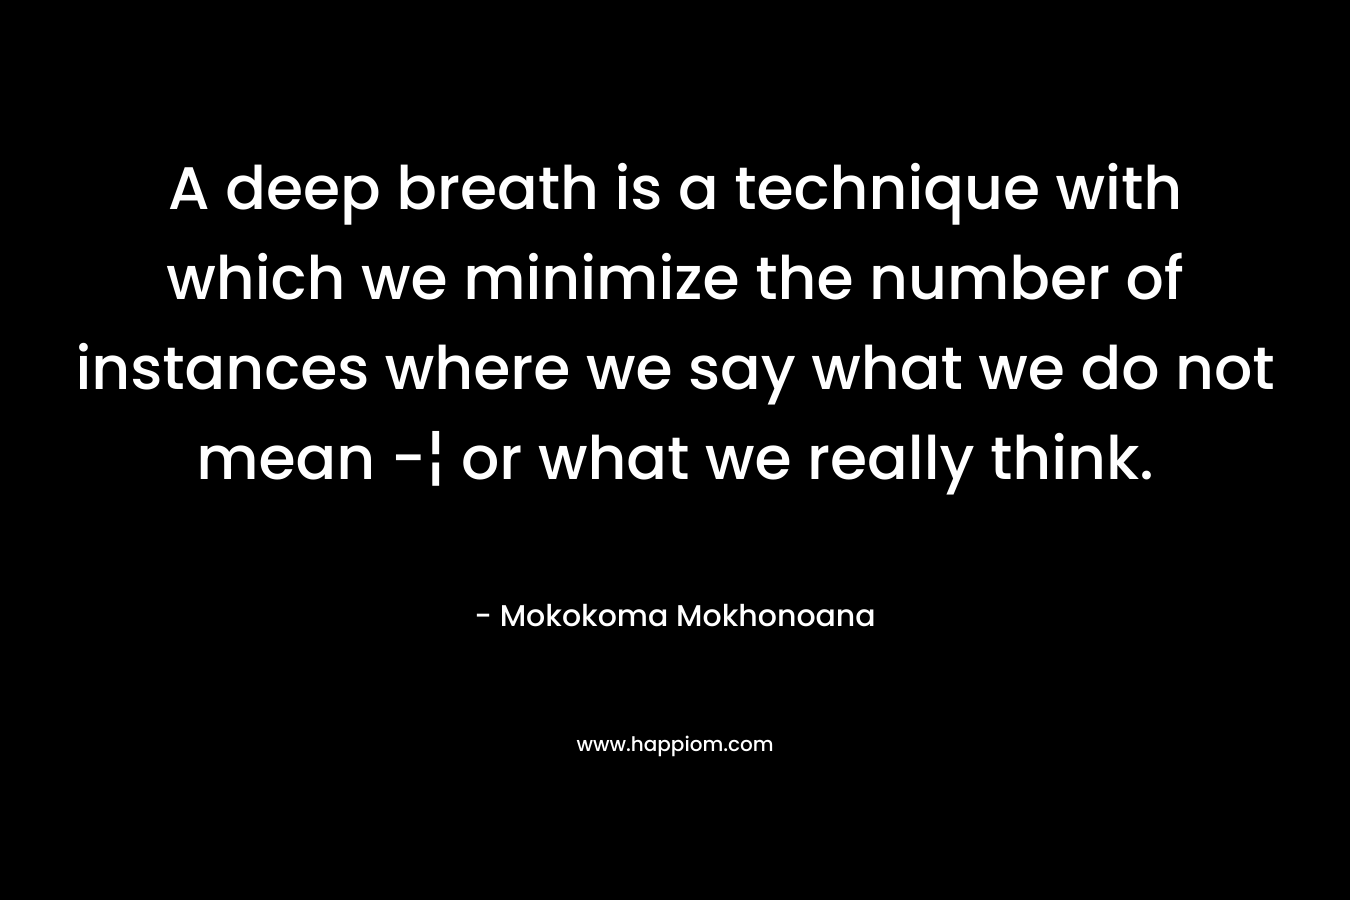 A deep breath is a technique with which we minimize the number of instances where we say what we do not mean -¦ or what we really think. – Mokokoma Mokhonoana